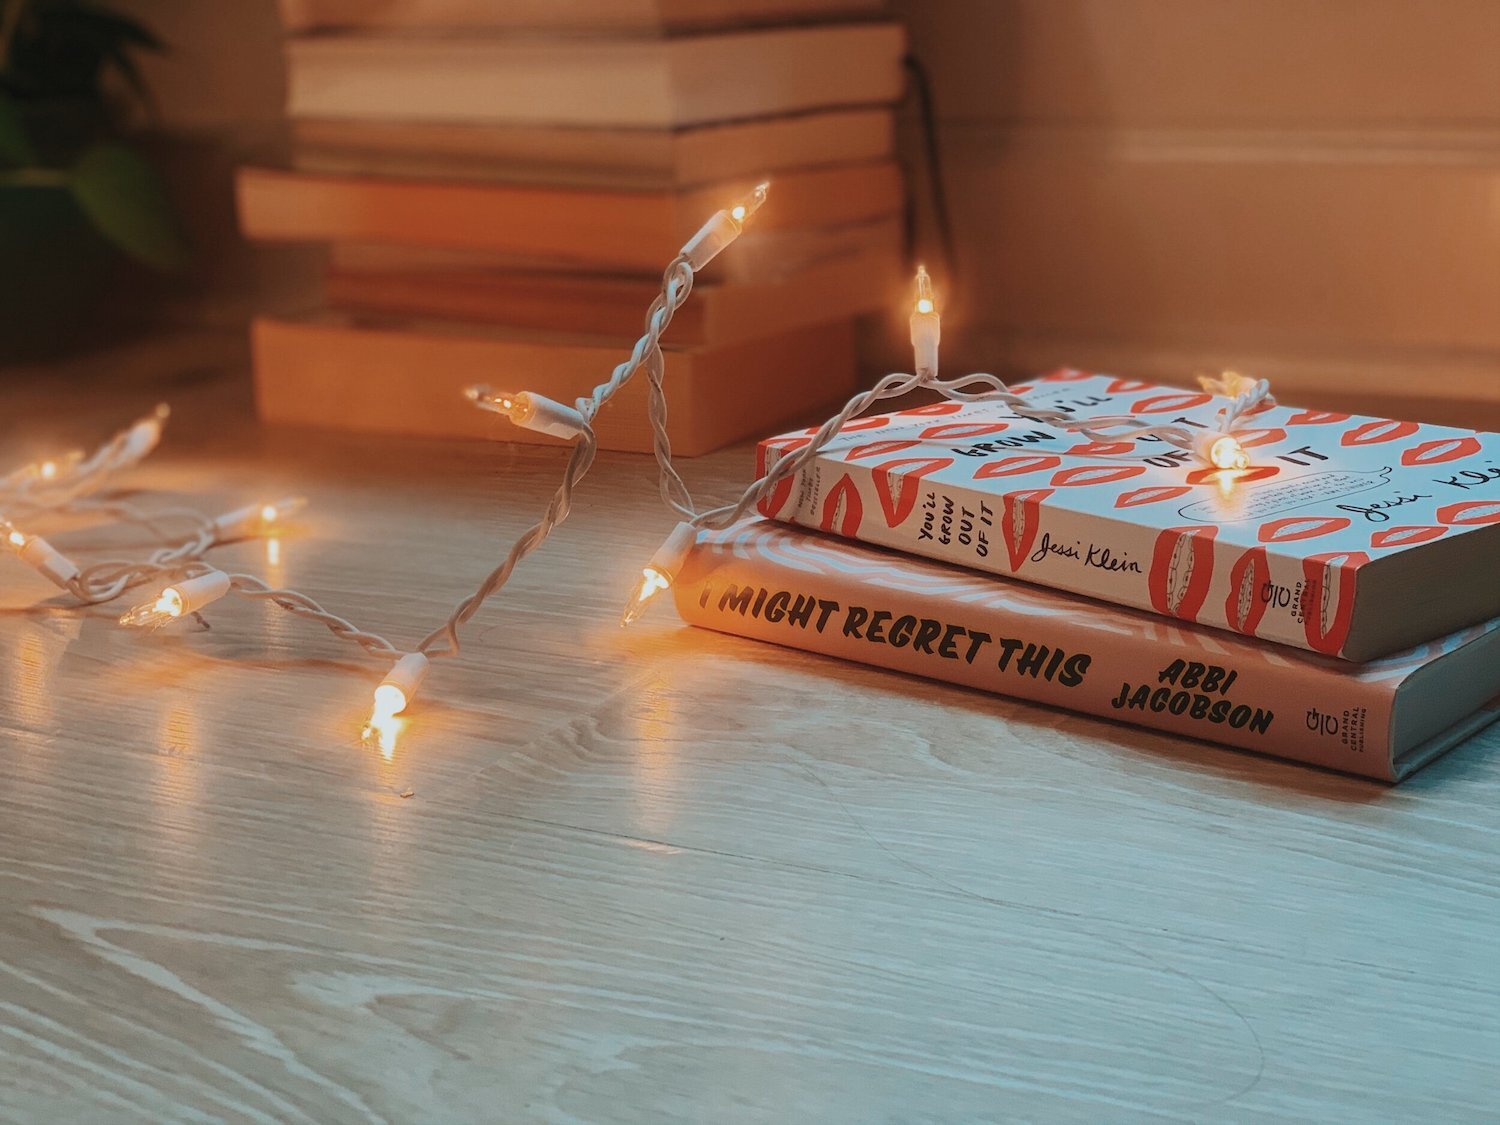 The books You’ll Grow Out of It by Jessi Klein and I Might Regret This by Abbi Jacobson are stacked on a wooden floor next to some other books. A strand of warm twinkly lights lies across them, and there is a potted plant in the background.